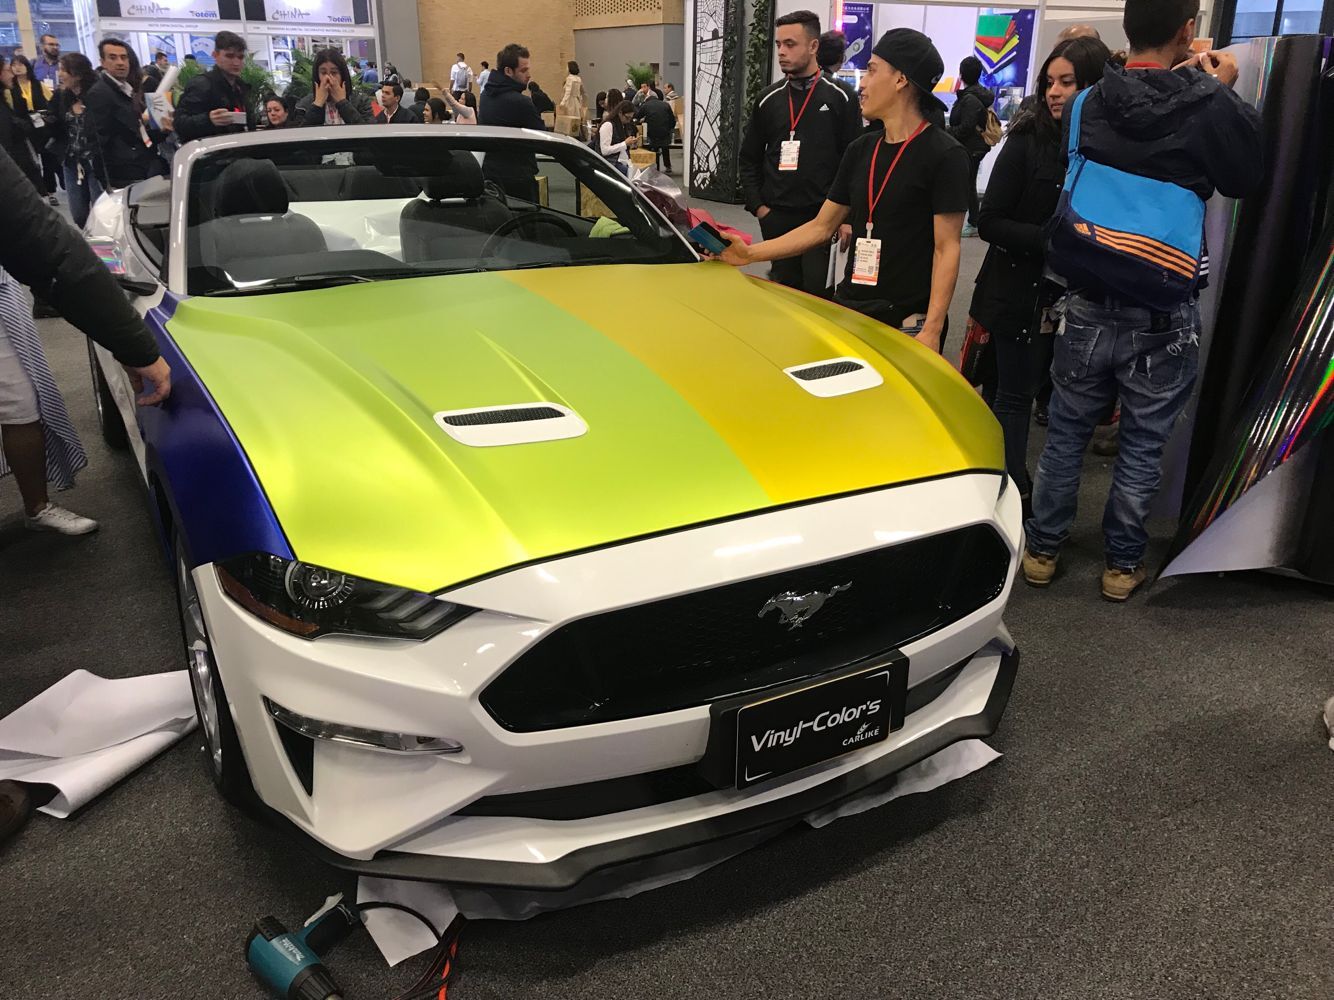 CARLIKE Premium+ Car Wrapping Vinyl joins hands with Vinyl Color's attending Andigráfica 2019 in Bogotá Colombia